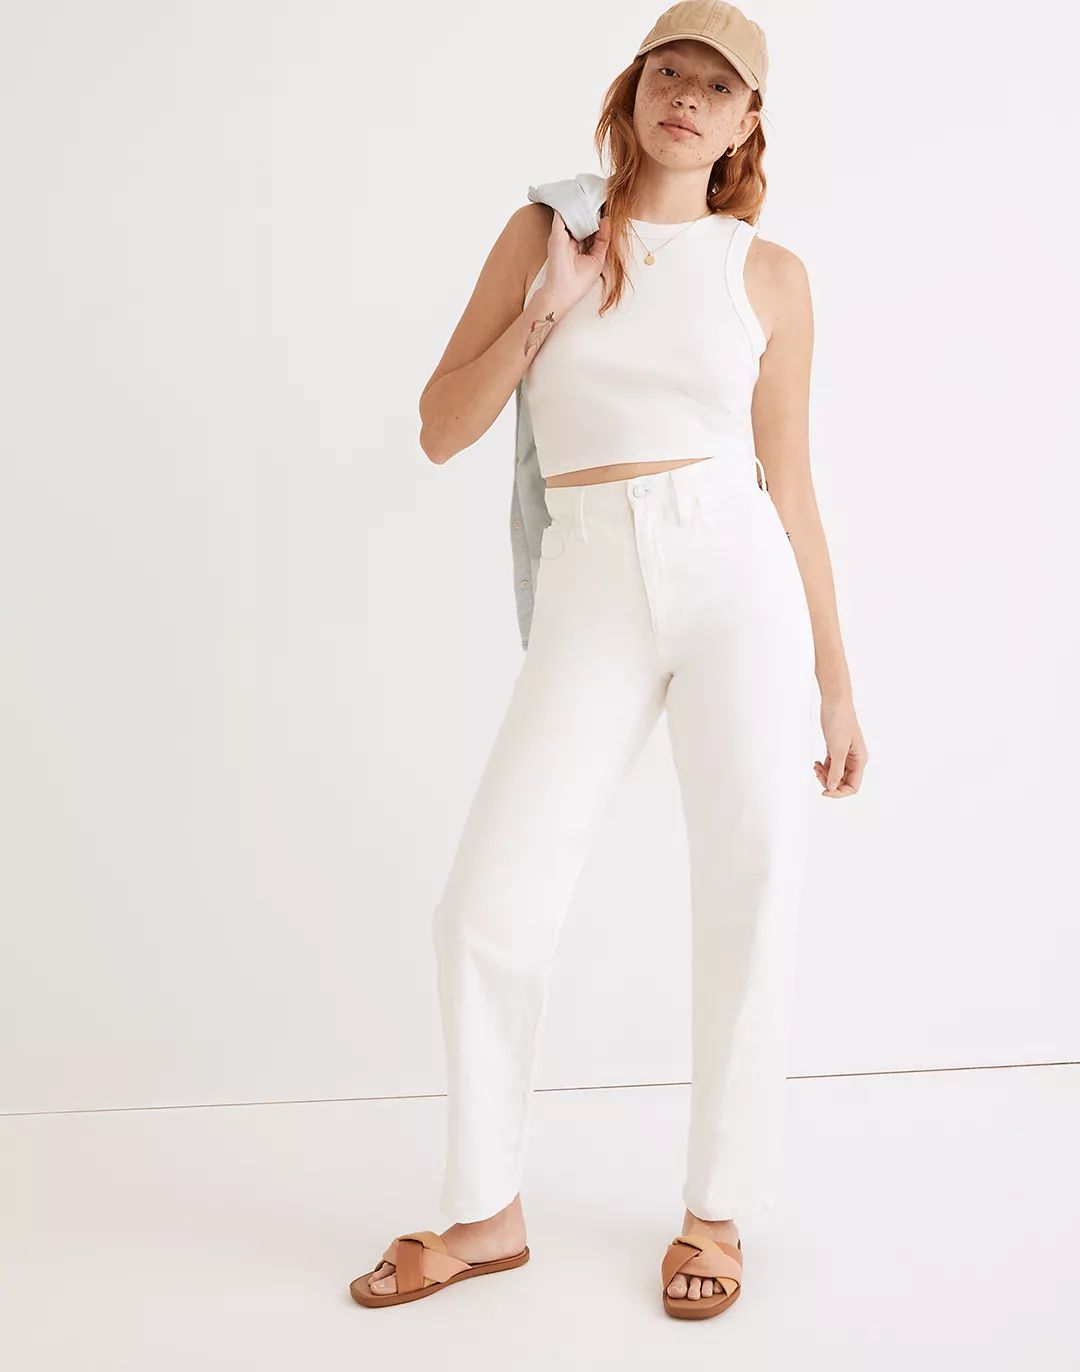 The Convertible Paperbag Dadjean in Tile White | Madewell